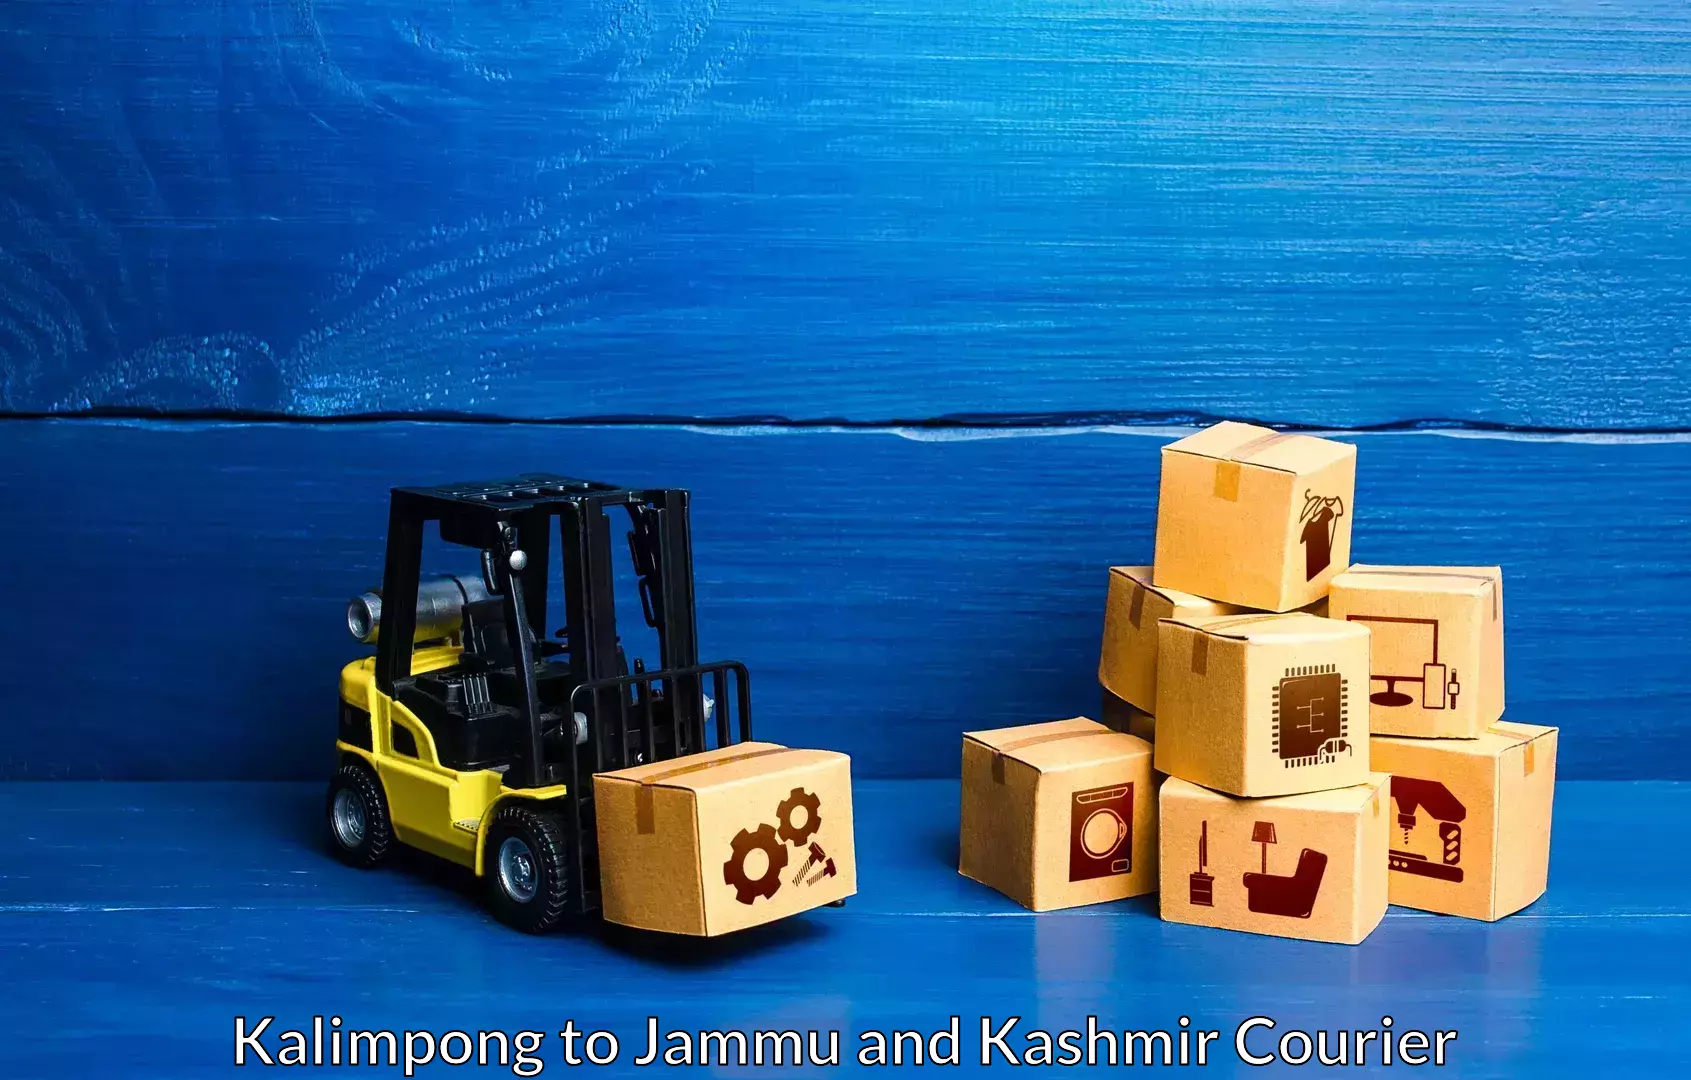 Furniture transport specialists Kalimpong to Baramulla